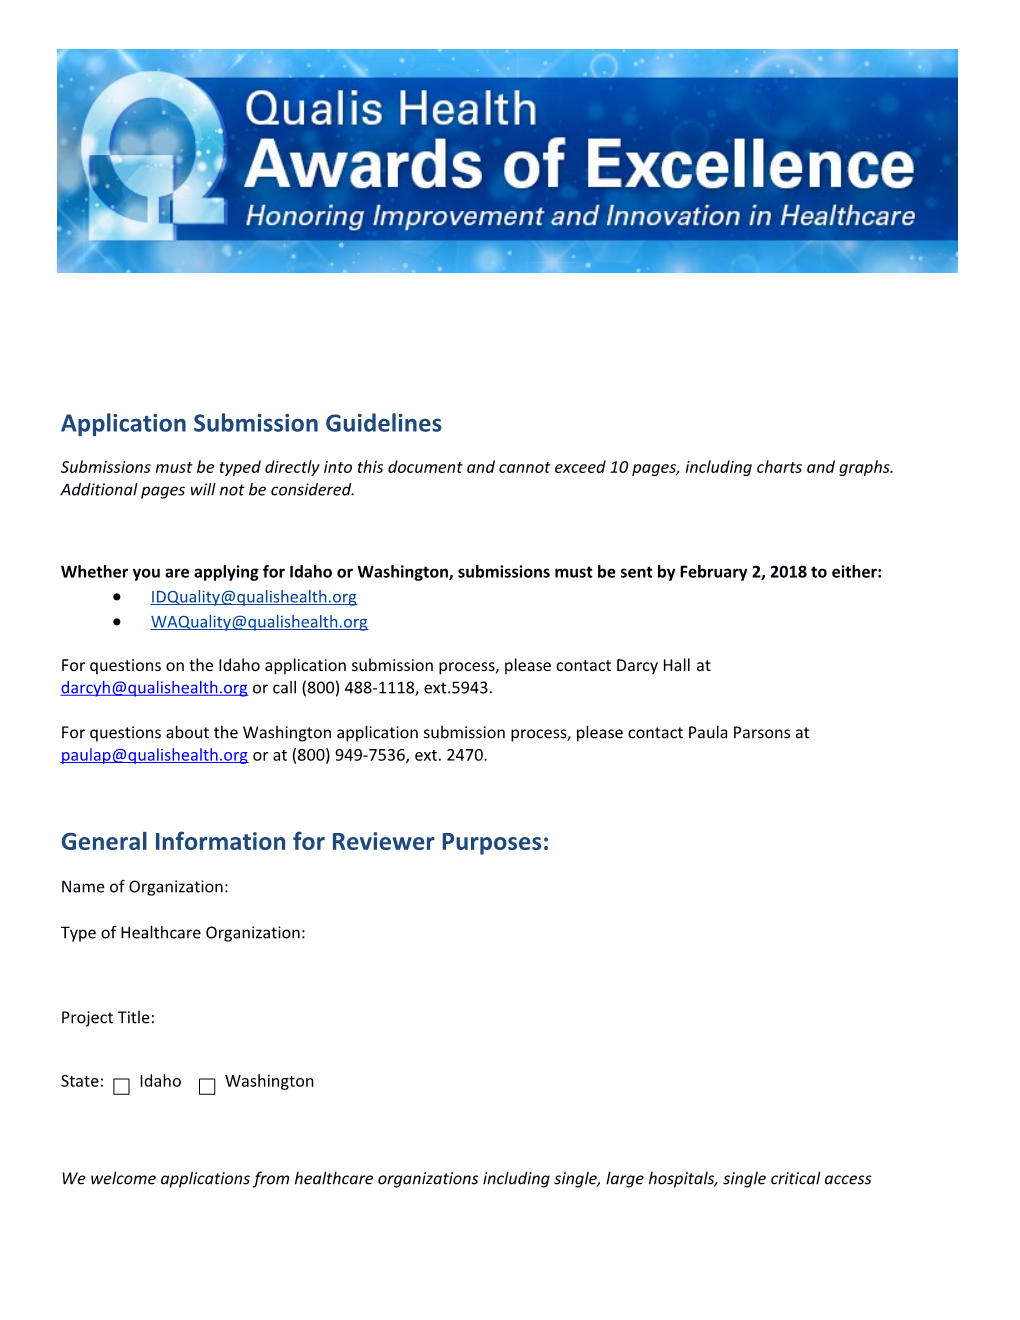 Award of Excellence in Healthcare Quality Application s1